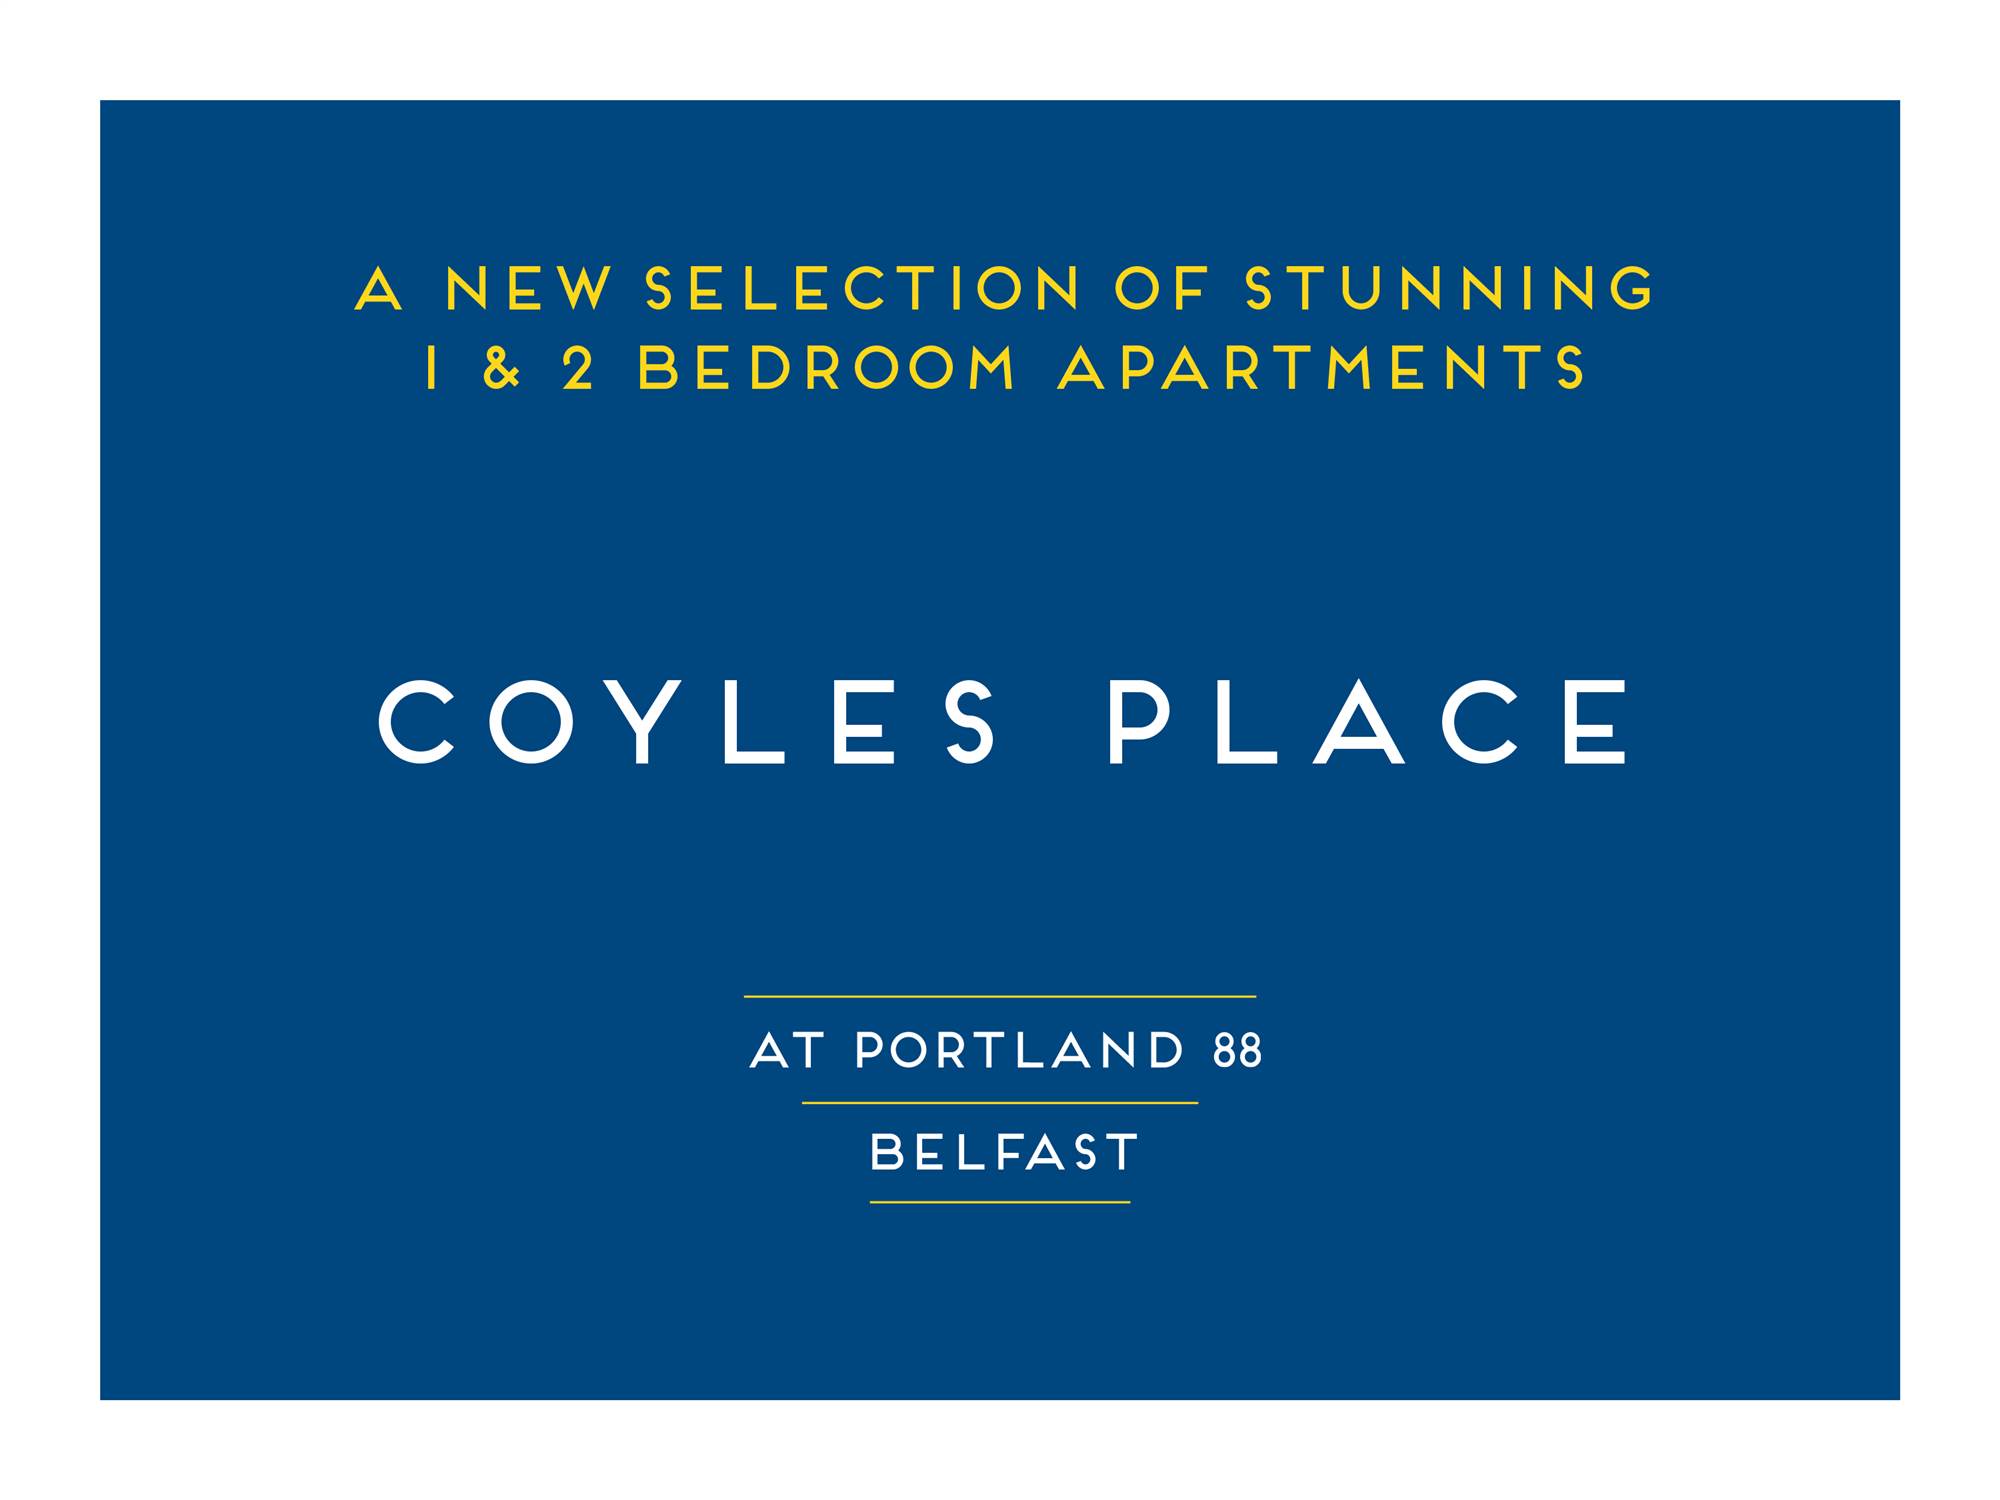 Coyles Place at Portland 88